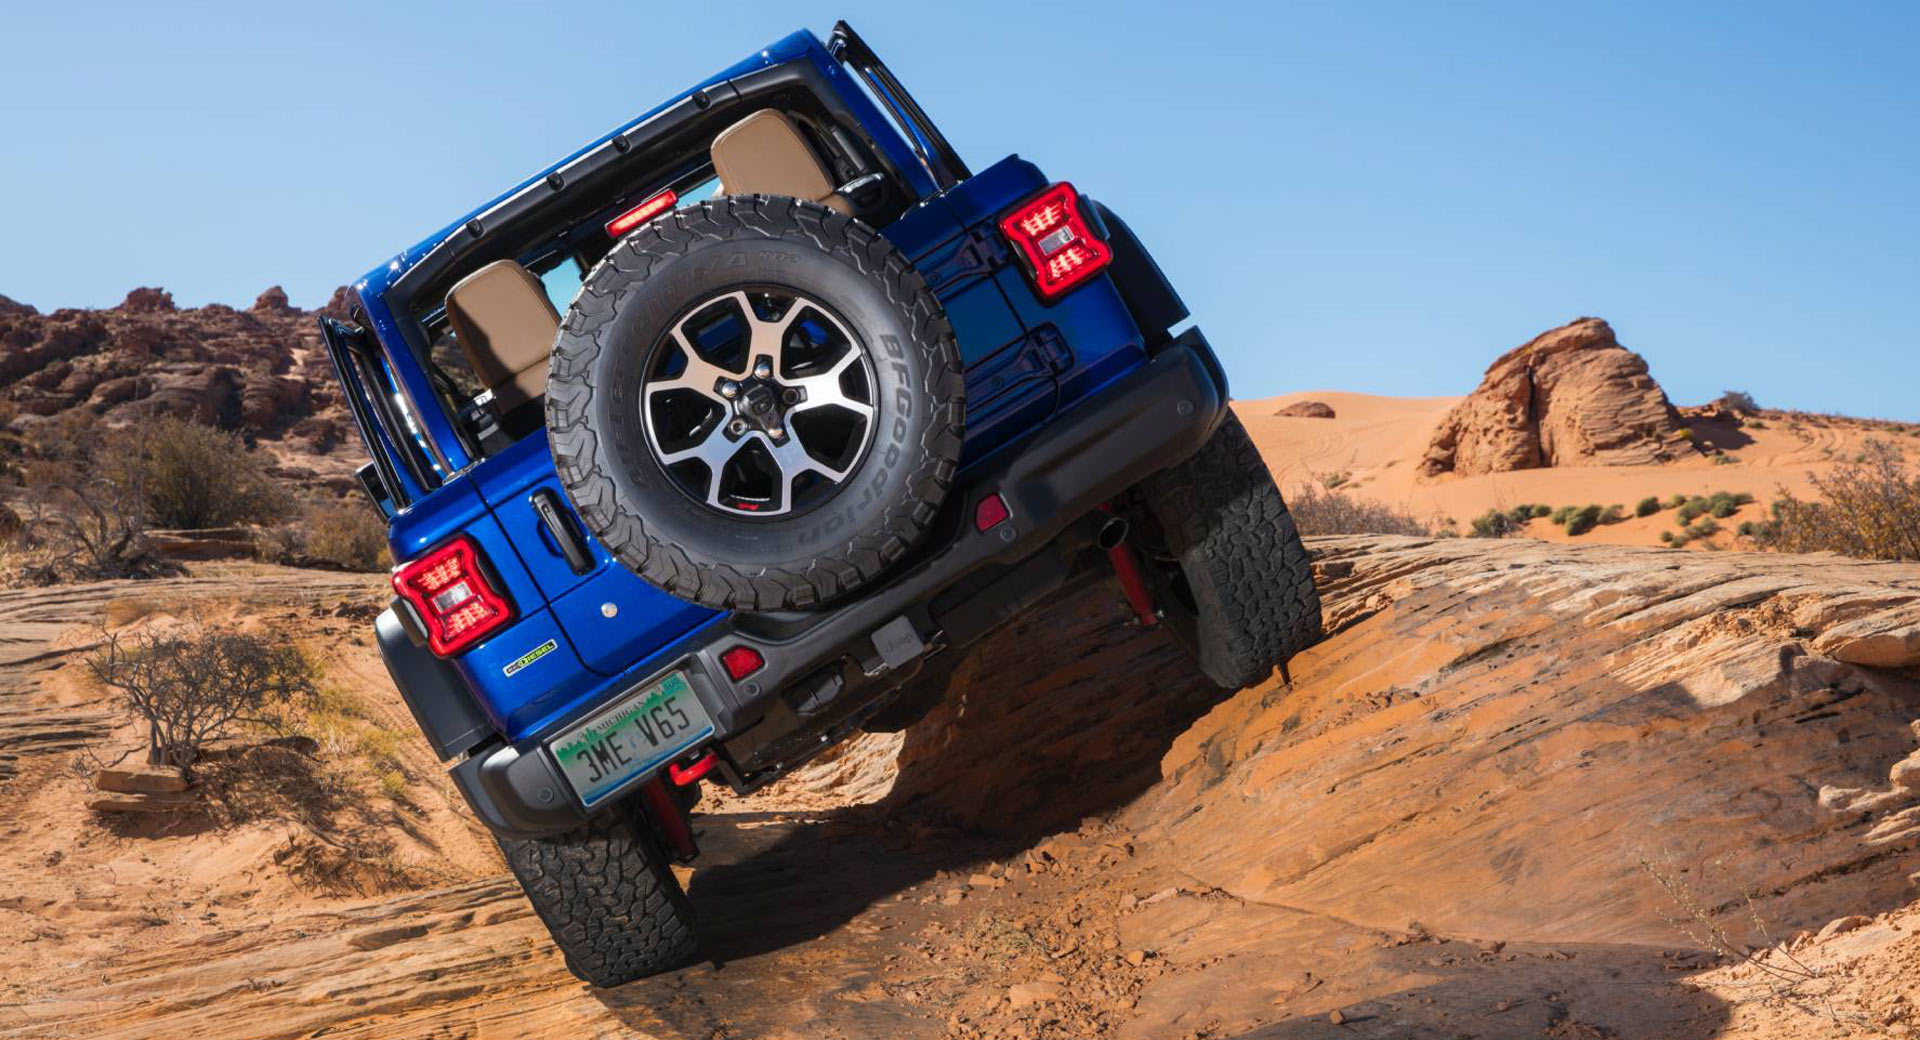 2020 Jeep Wrangler EcoDiesel Rated At 25 MPG Combined | Carscoops